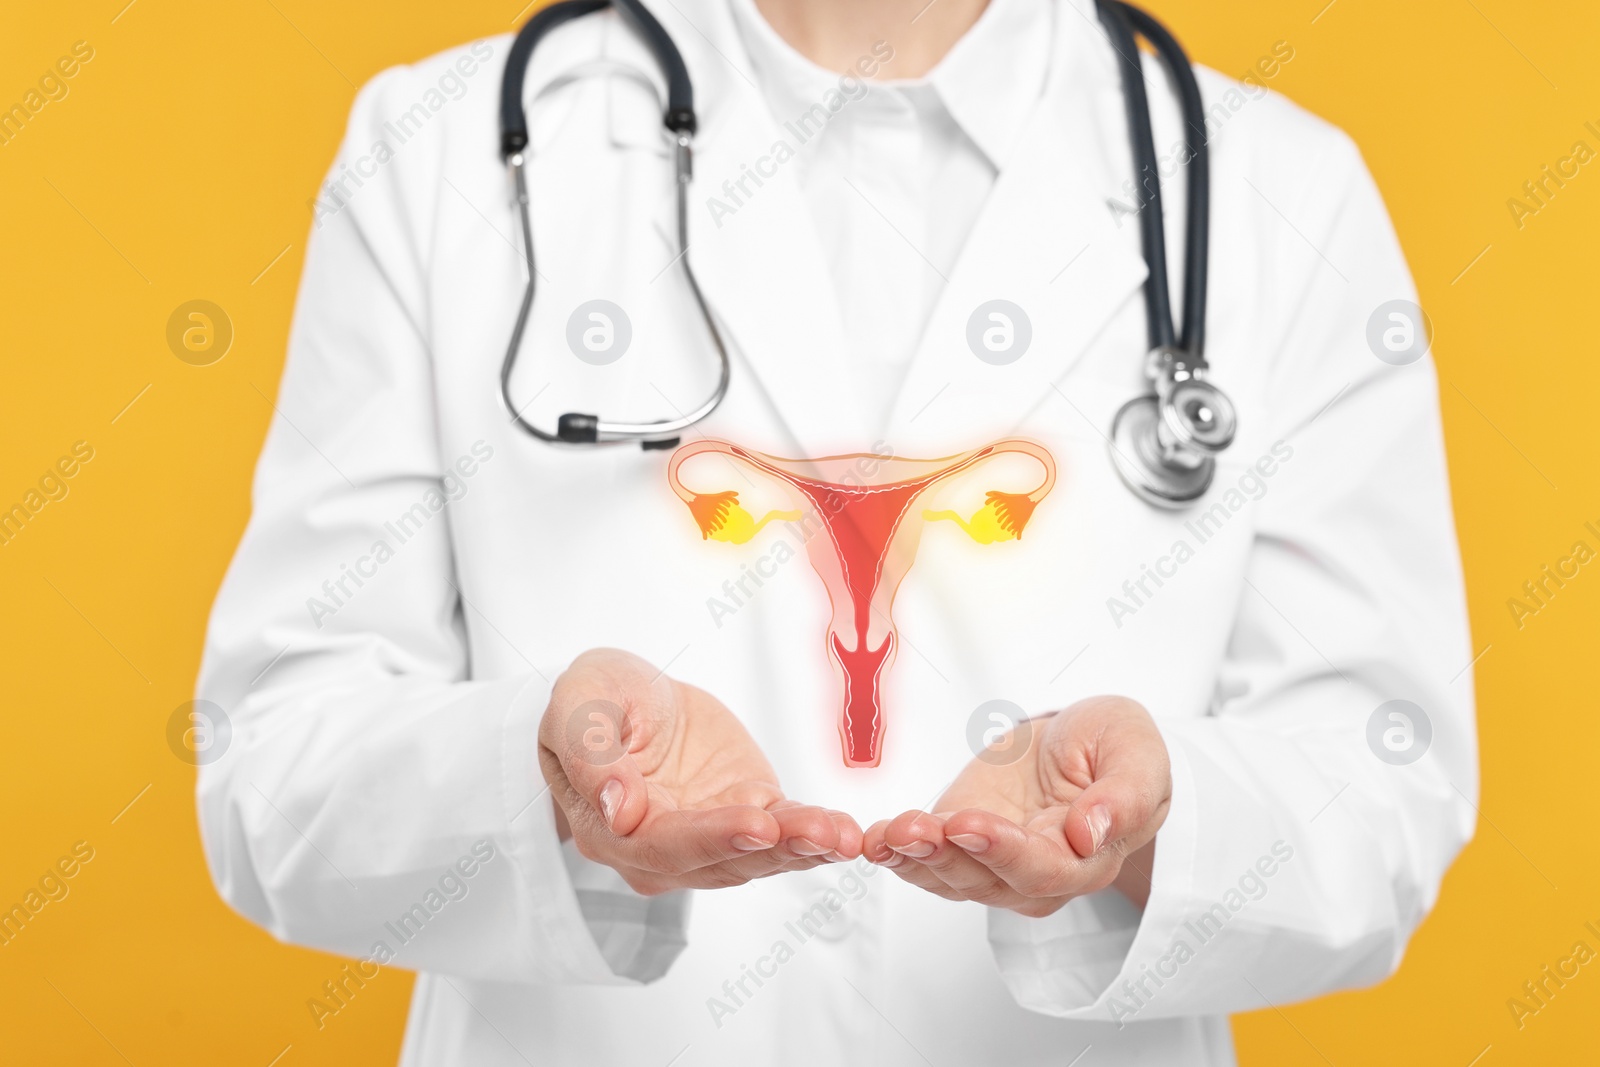 Image of Doctor and illustration of female reproductive system on orange background, closeup